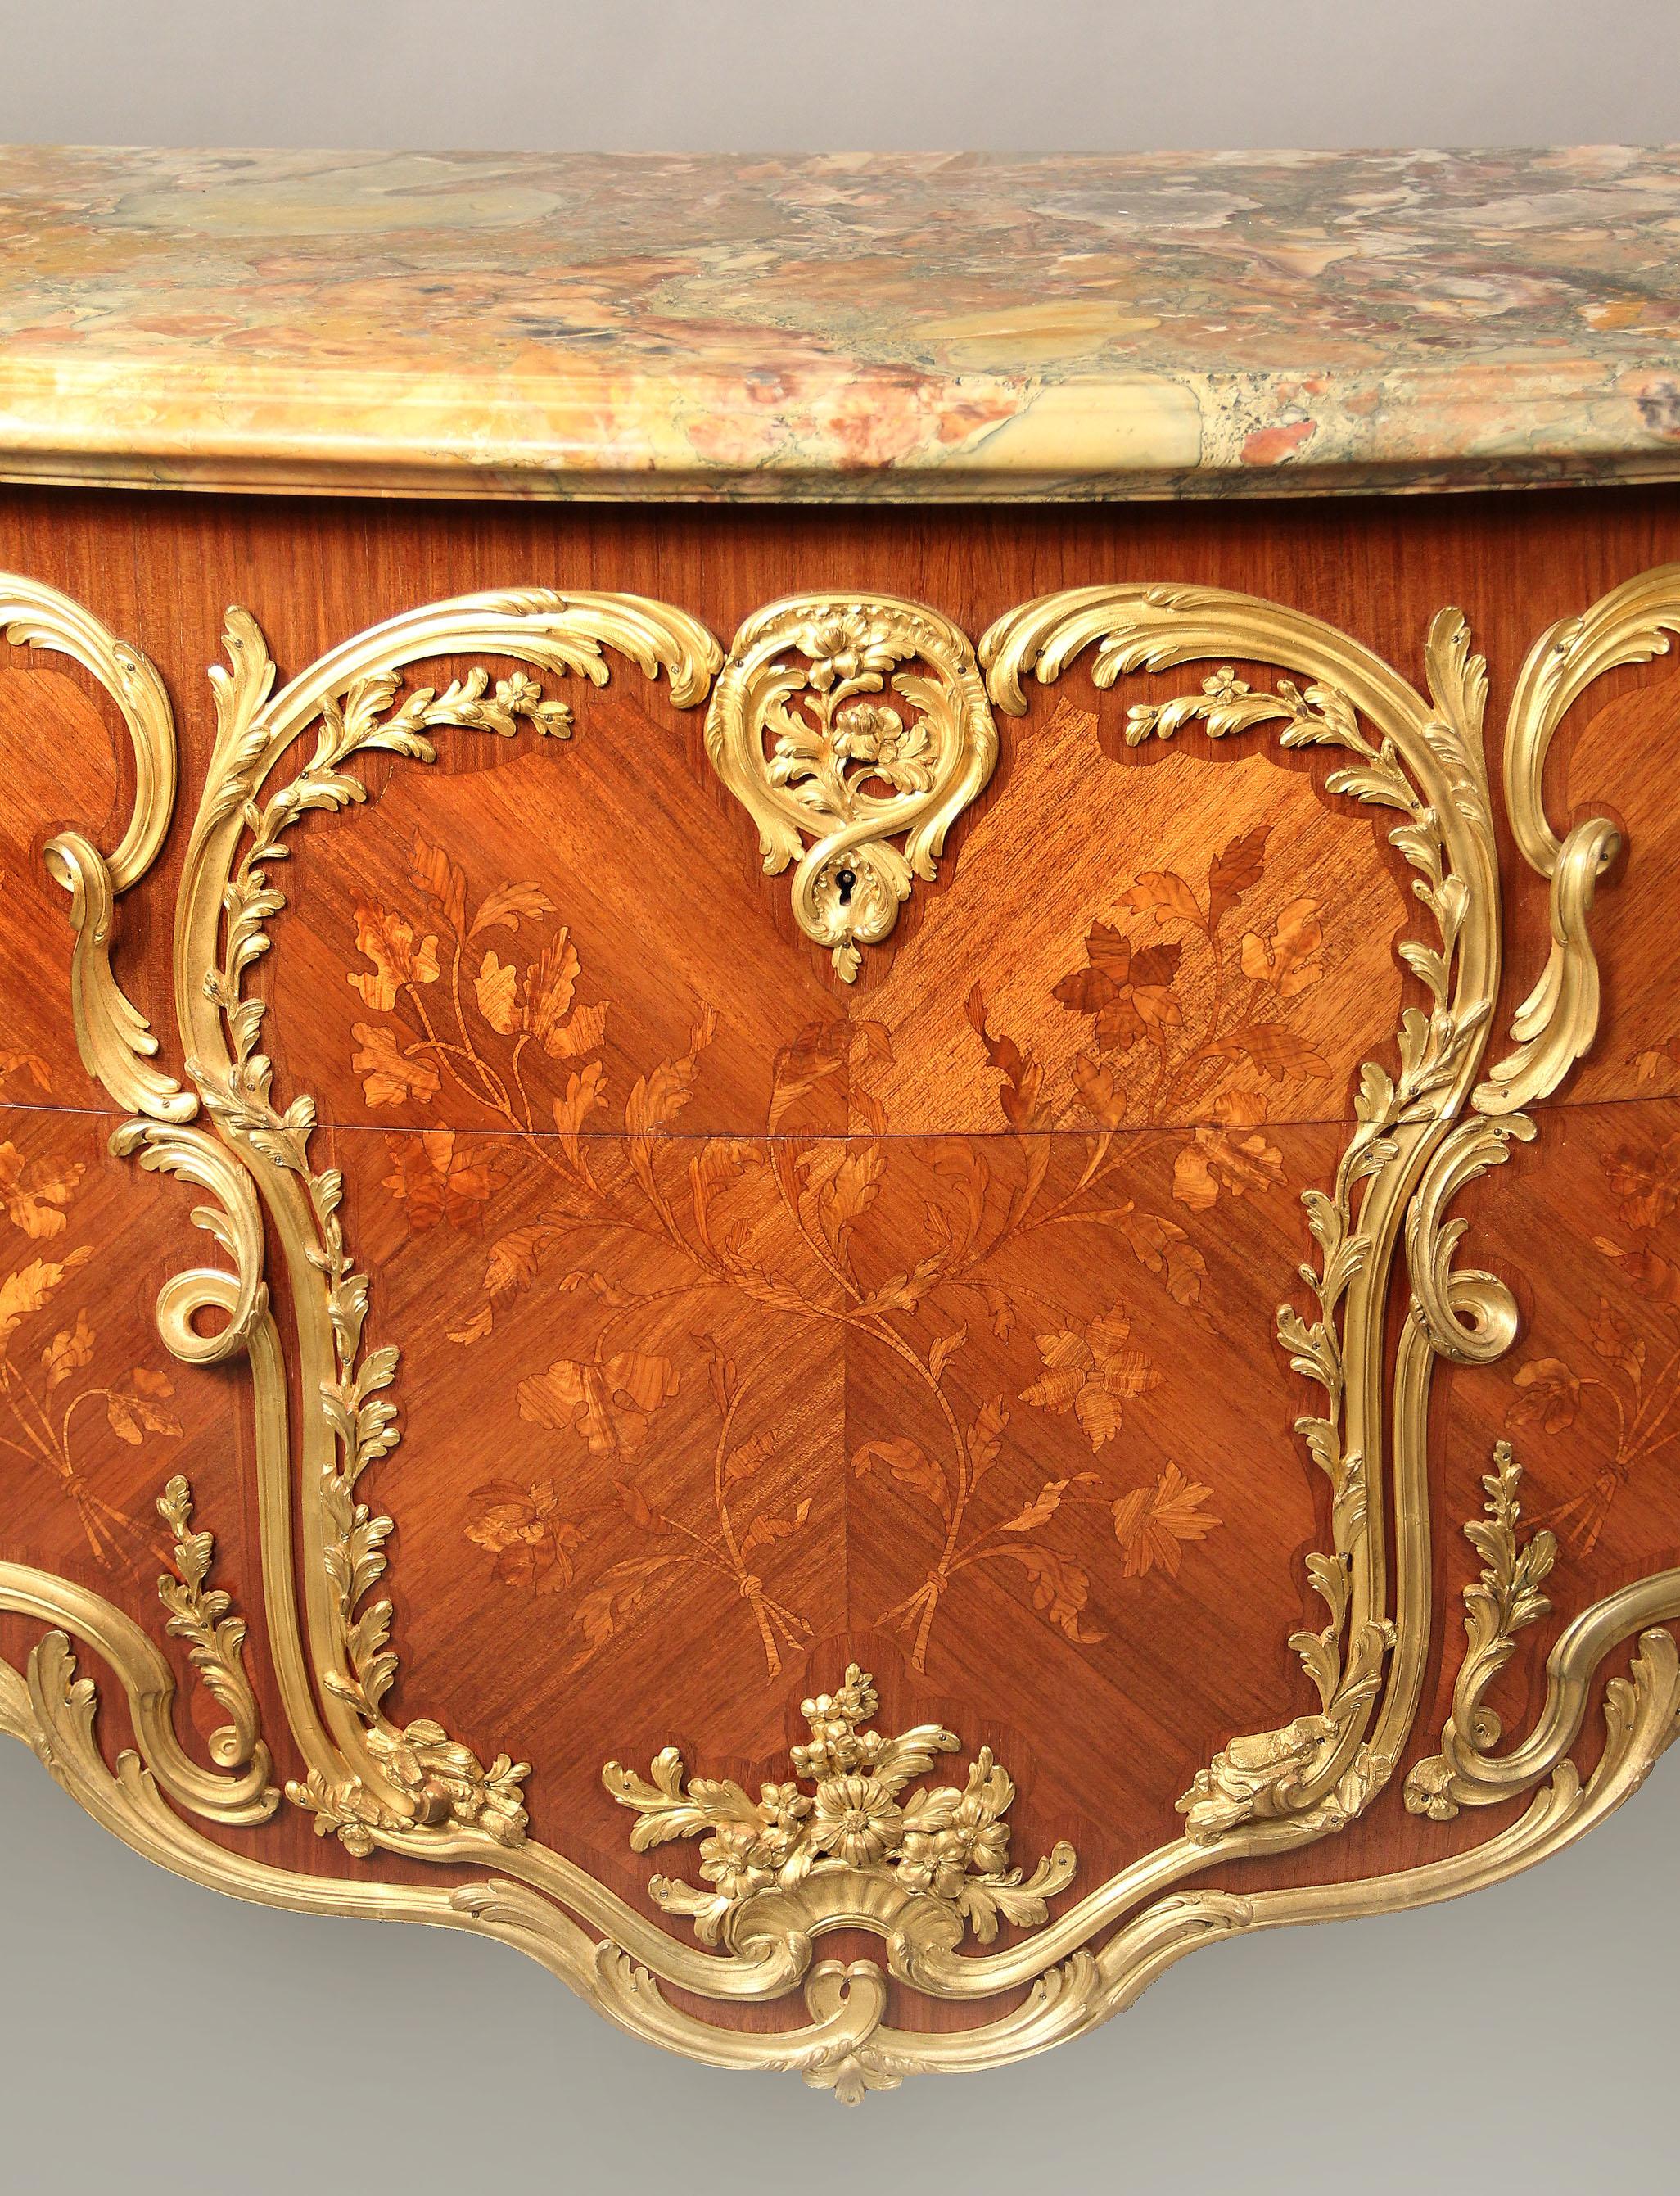 An important late 19th century Louis XV style gilt bronze mounted inlaid floral Marquetry commode by Antoine Krieger

Antoine Krieger

A finely cut marble top above two deep long drawers with inlaid floral marquetry panels and heavy gilt bronze